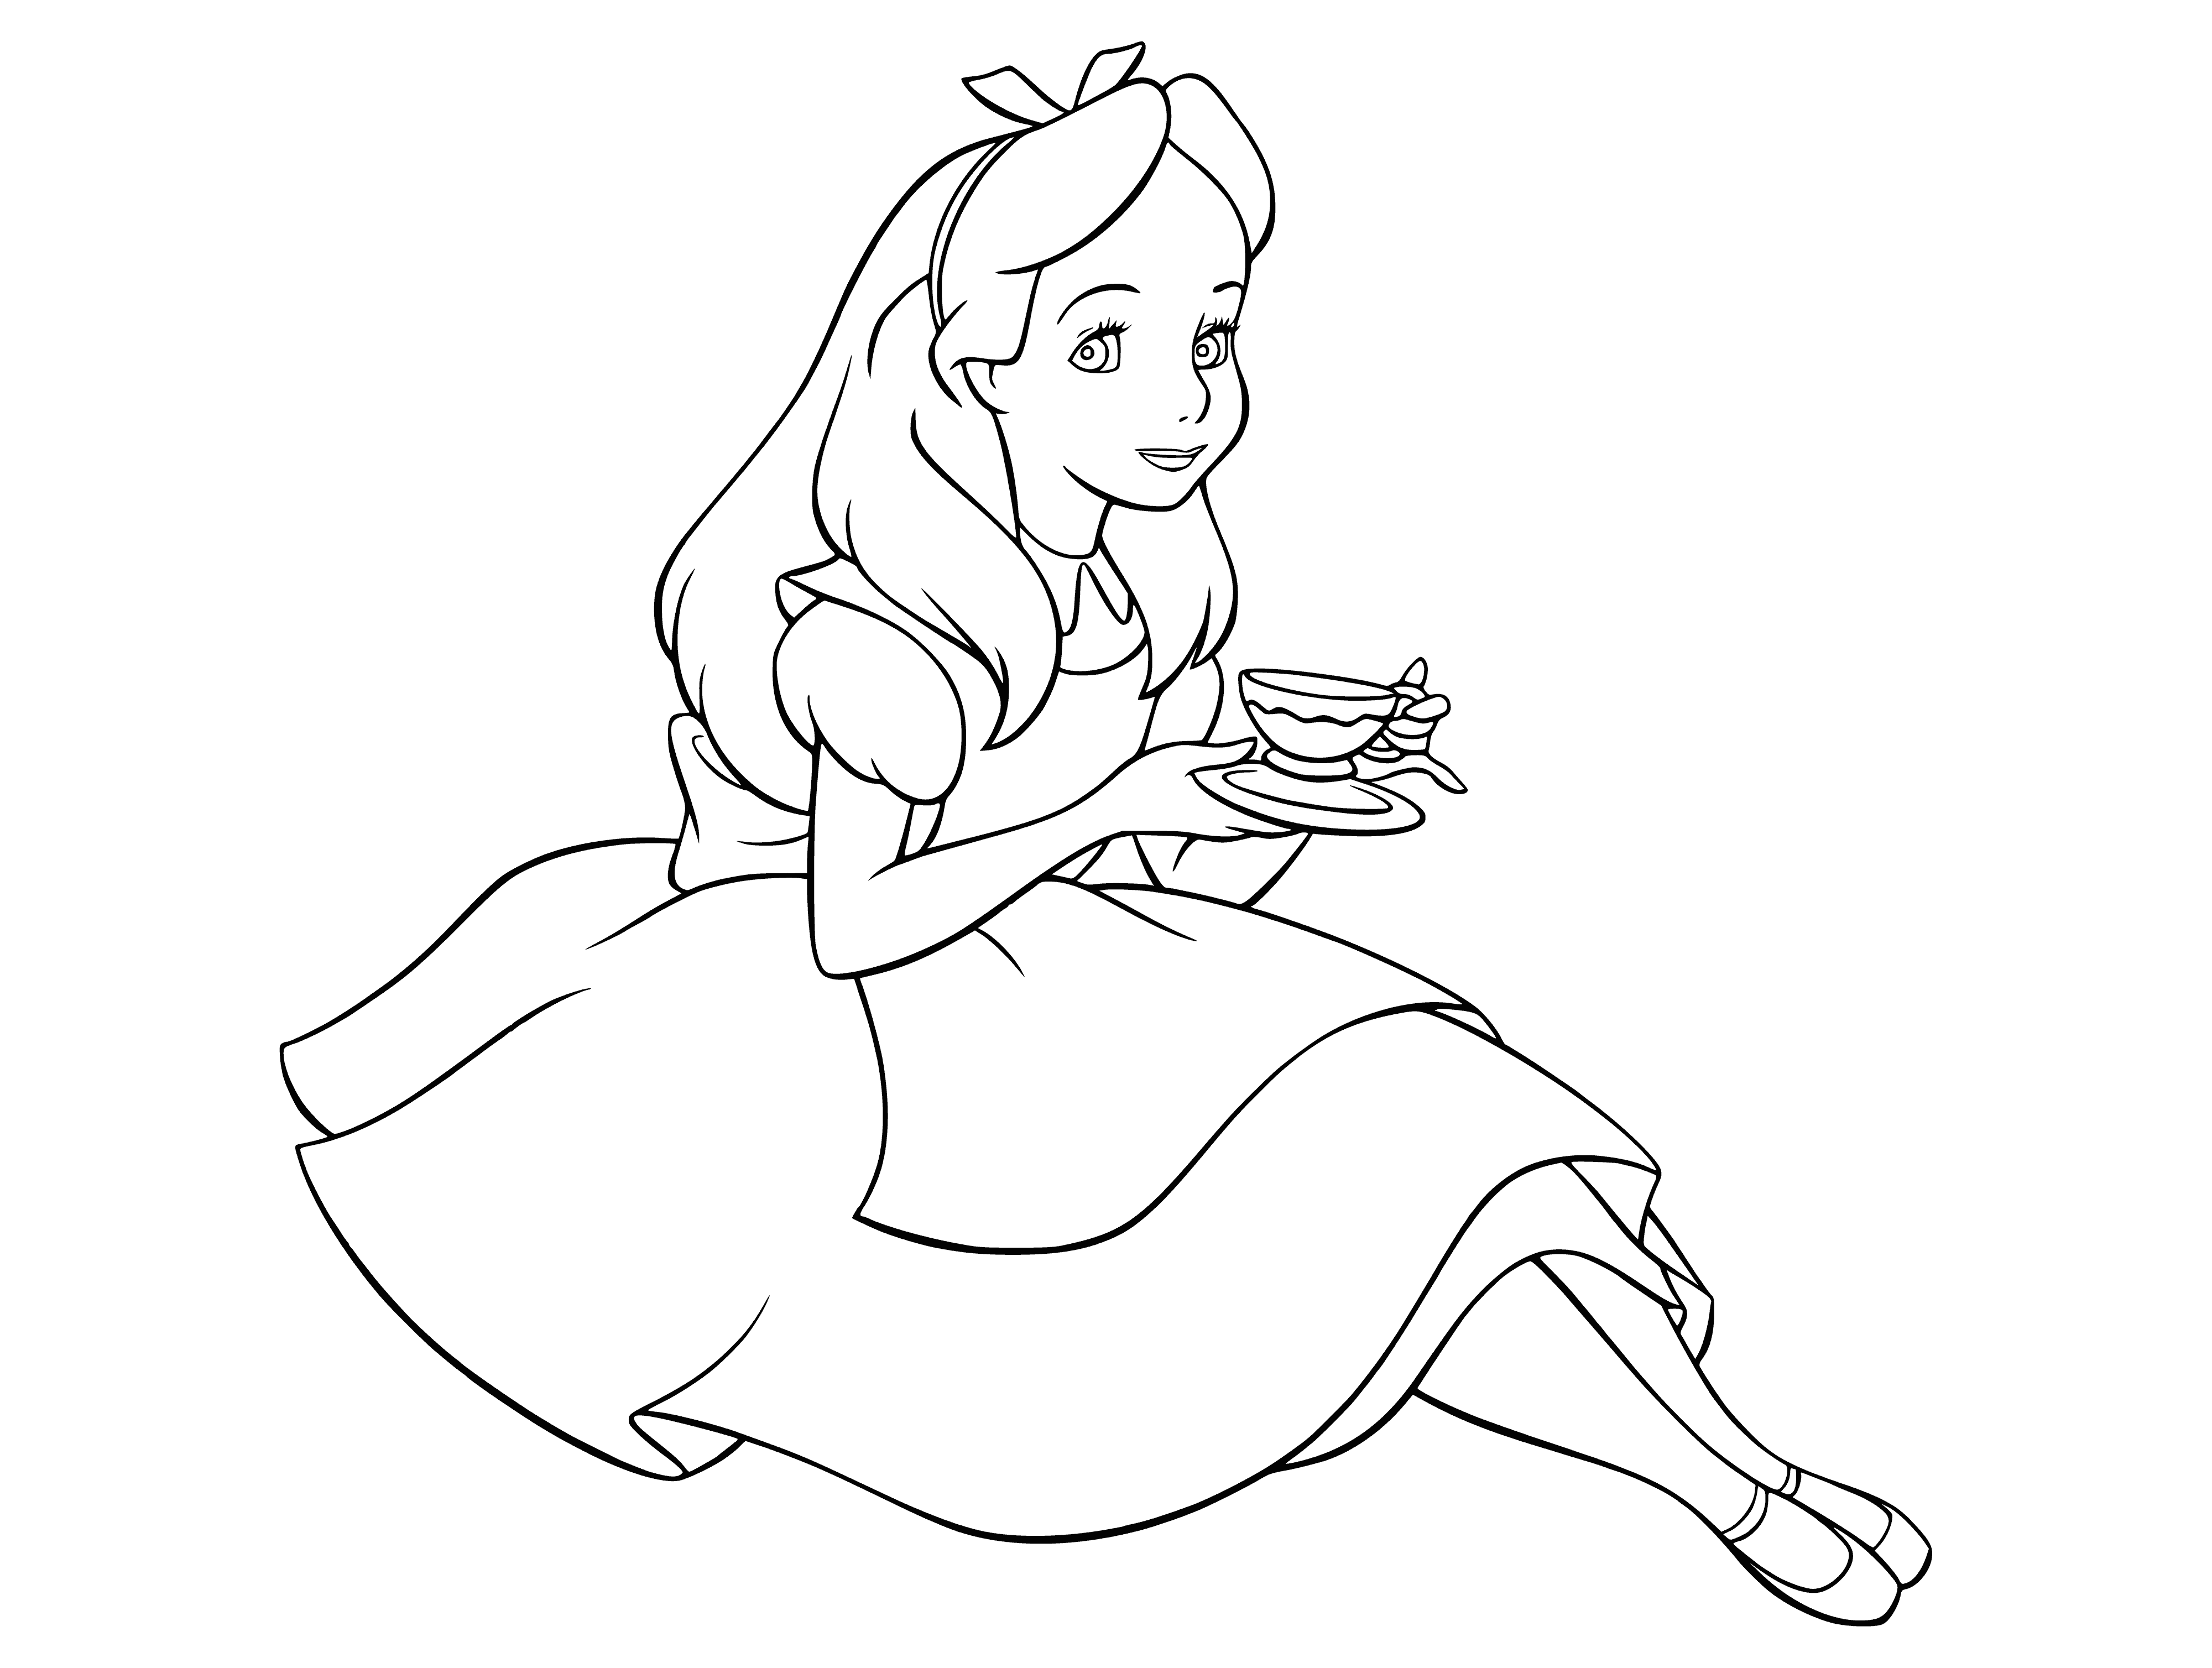 coloring page: She's gripping a big cup eagerly, eyes wide and mouth open, about to take a big sip.